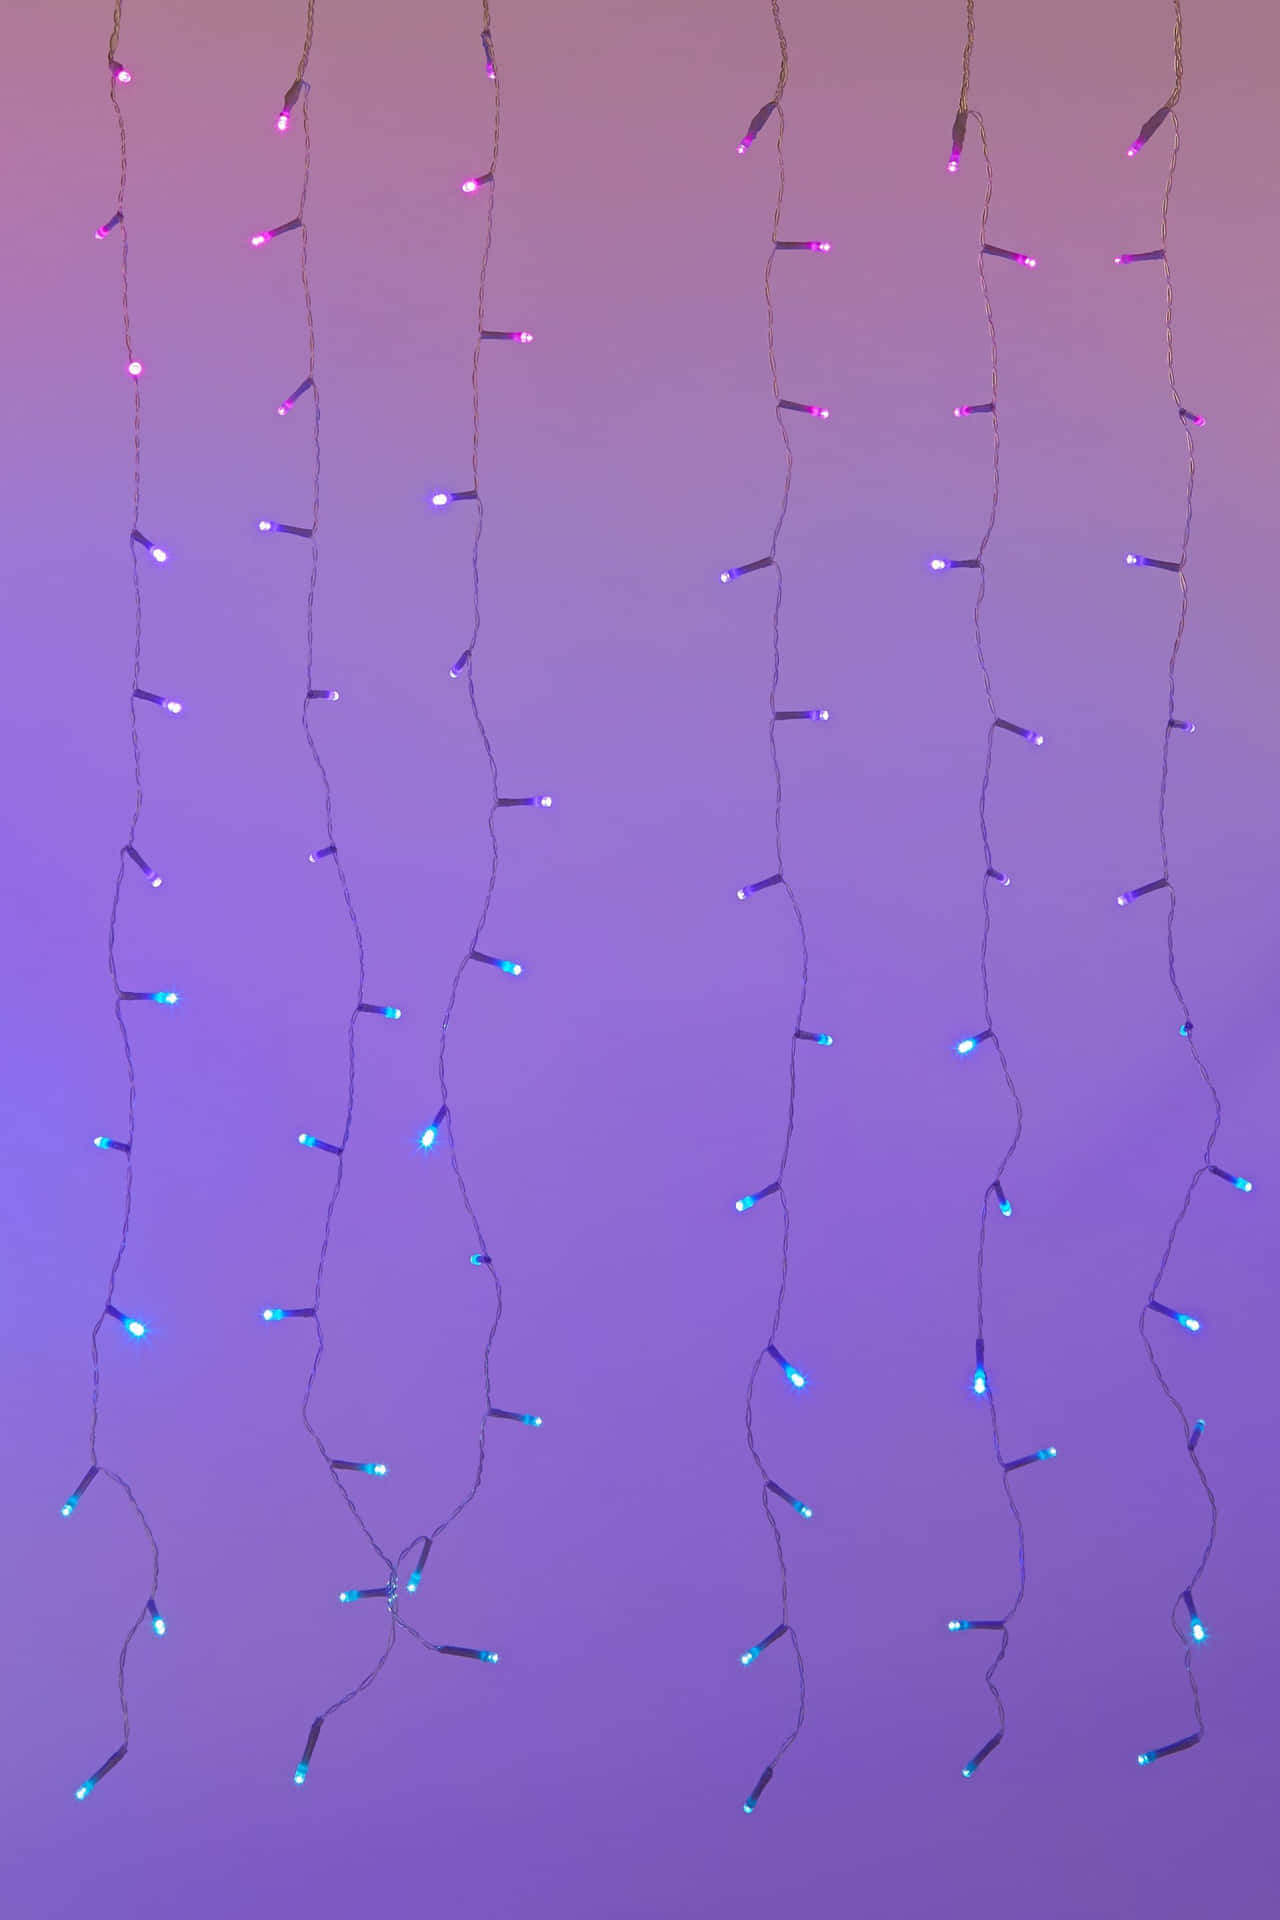 A Purple And Blue Light String Hanging From A Purple Wall Wallpaper